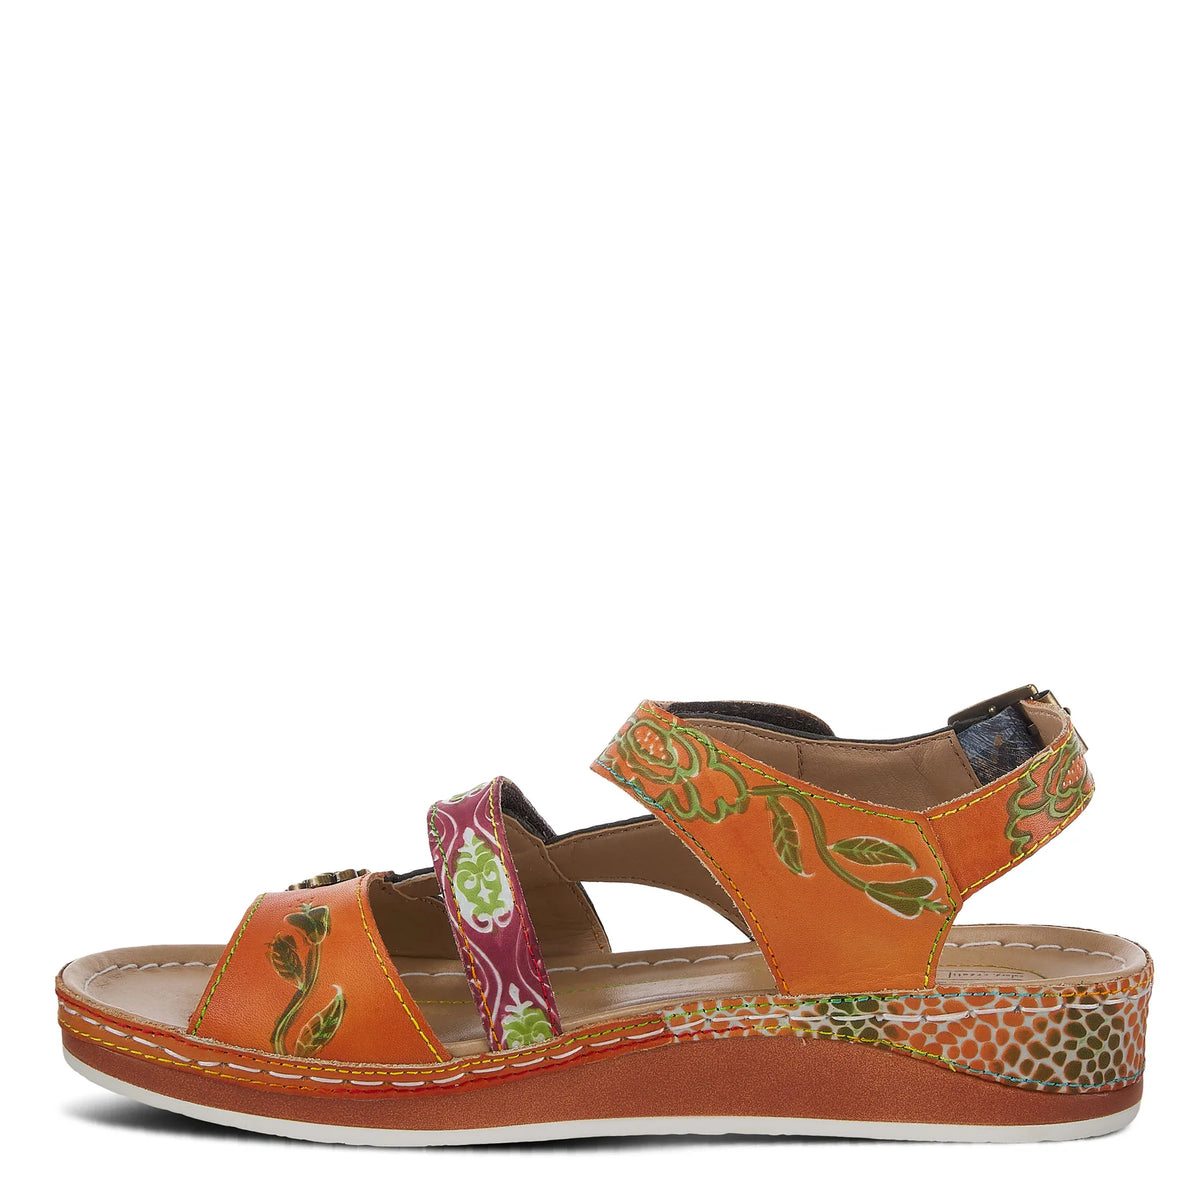 L'Artiste Style: Sumacah Ankle Strap Leather Sandal Shoe SpringStep Shoes Womens Footwear Hand painted, French inspired. unique color blocked floral pattern metal flower button signature rainbow stitching Hook and Loop Velcro straps antiqued gold hardware, floral embossed design, leather pieced wedge. -Hook-and-loop adjustable straps and an adjustable buckled strap at the heel.